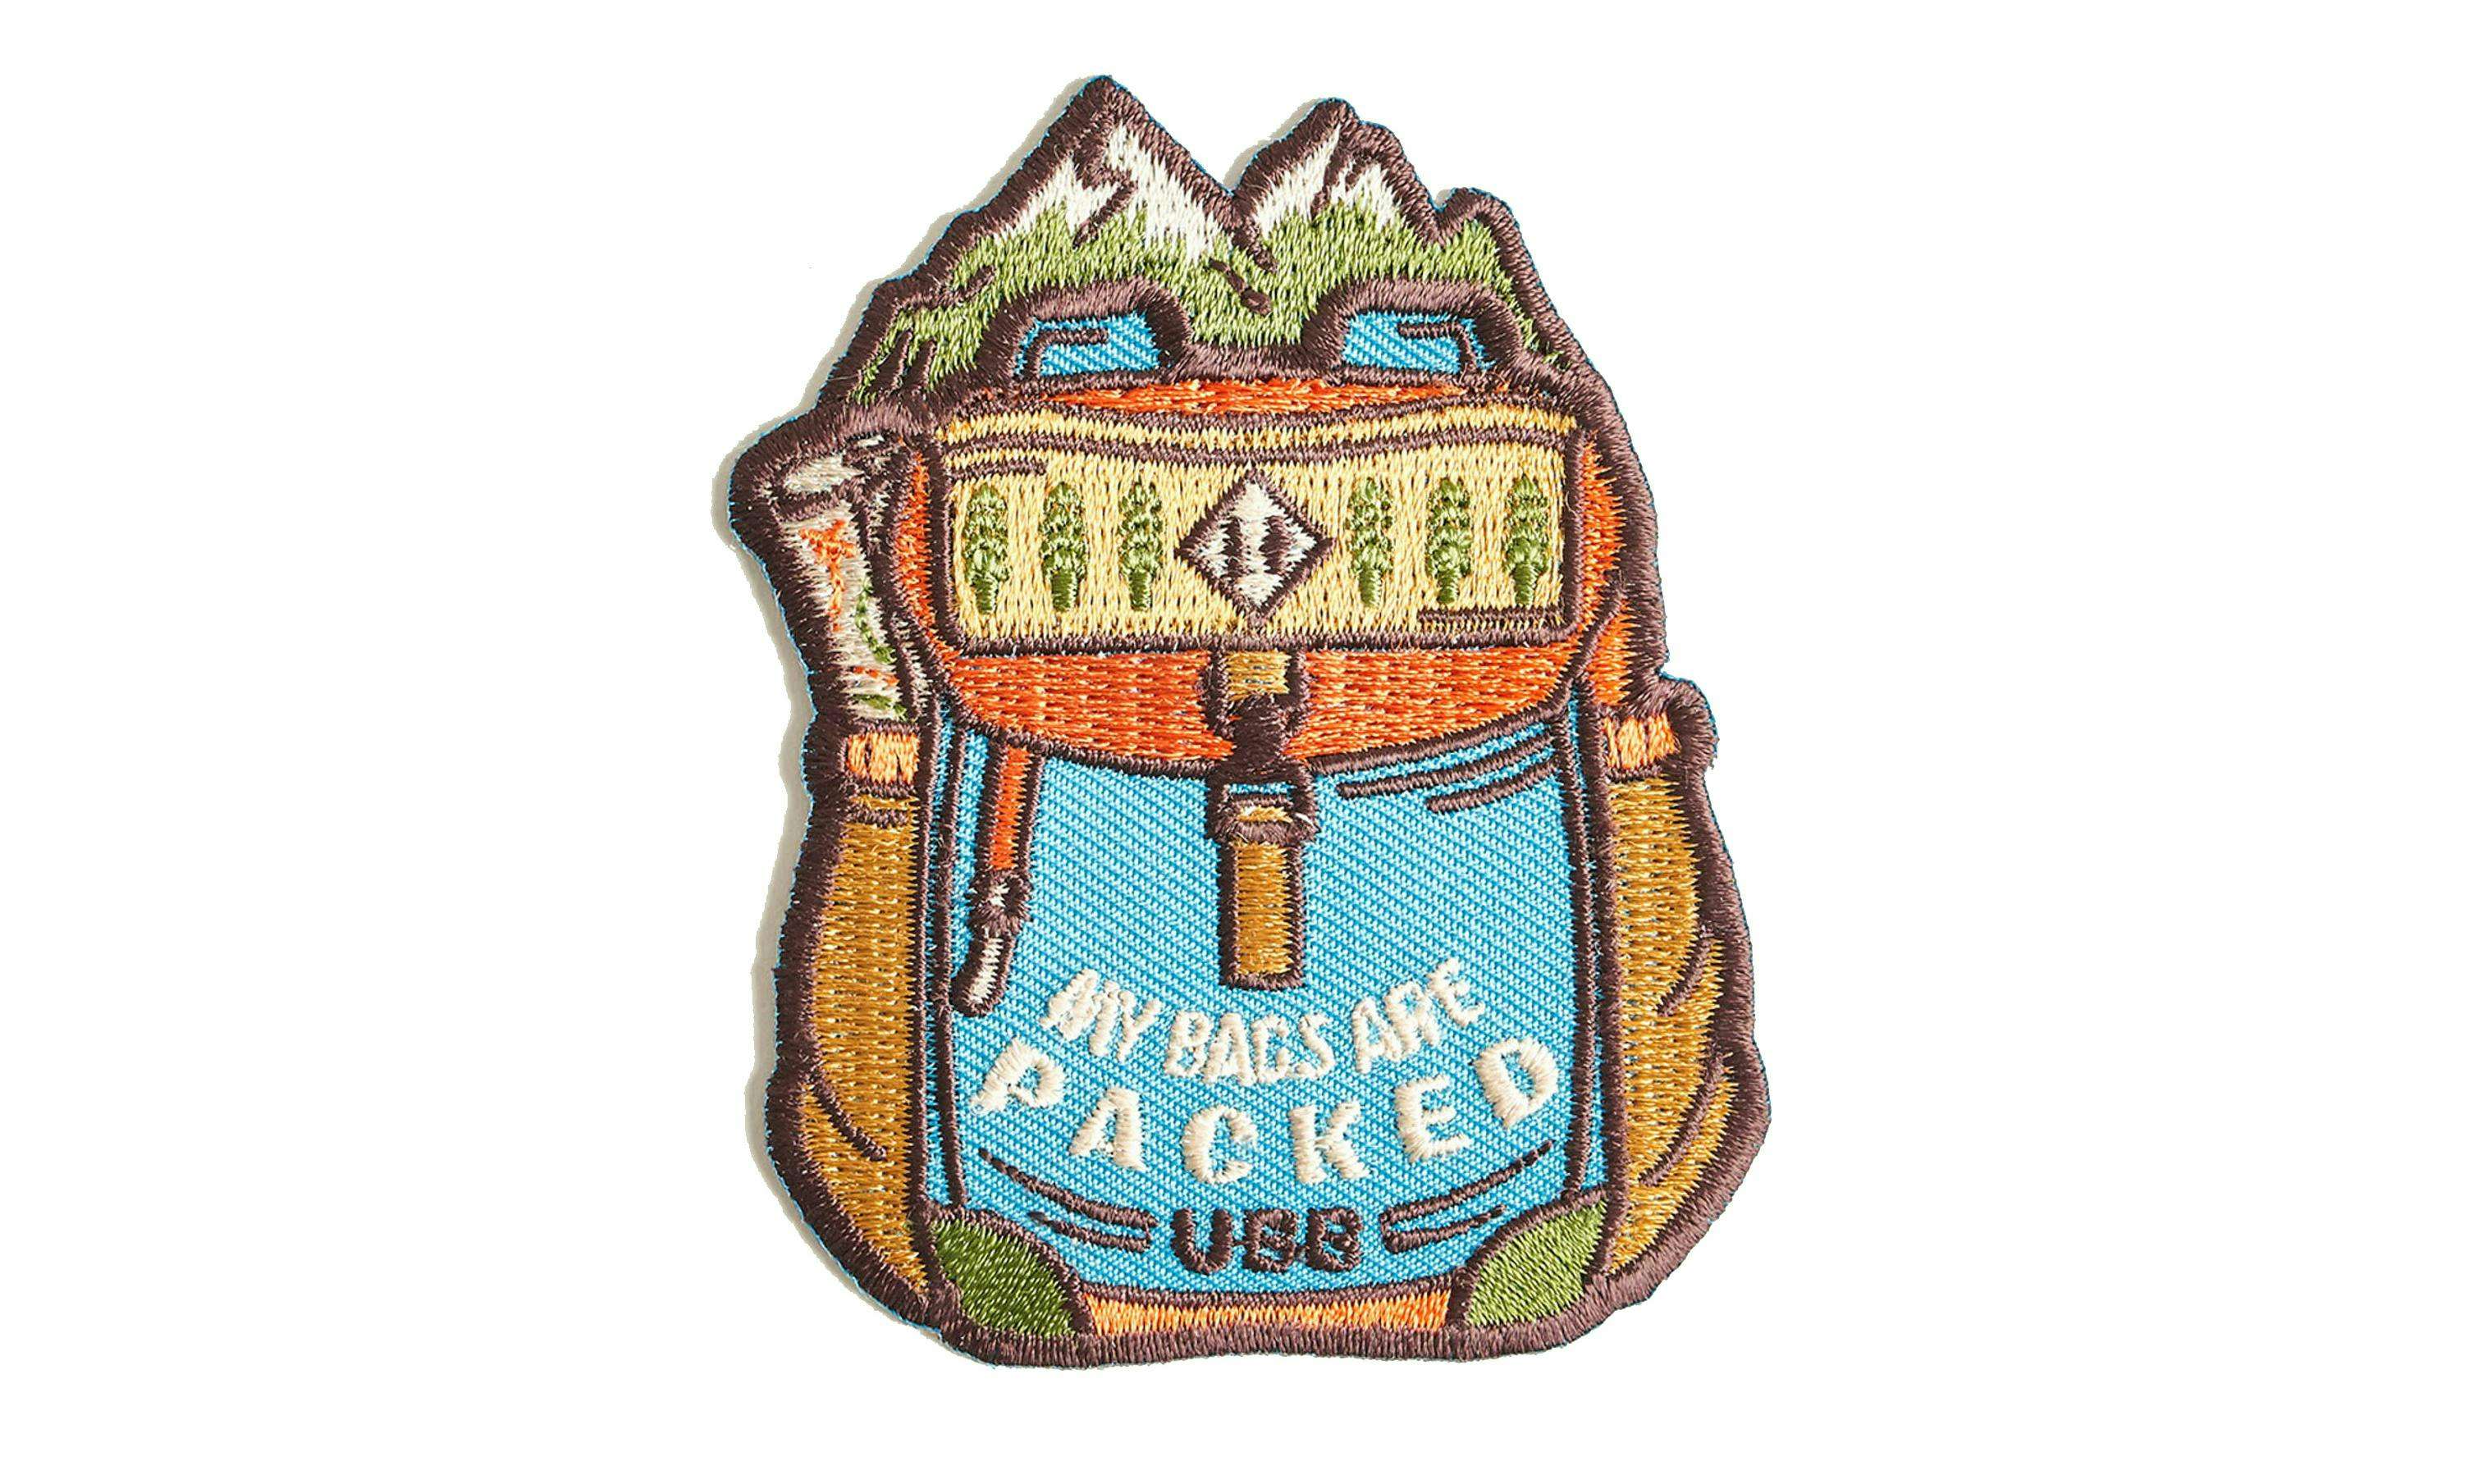 /en/product/6003-293/Bags-Are-Packed-Patch